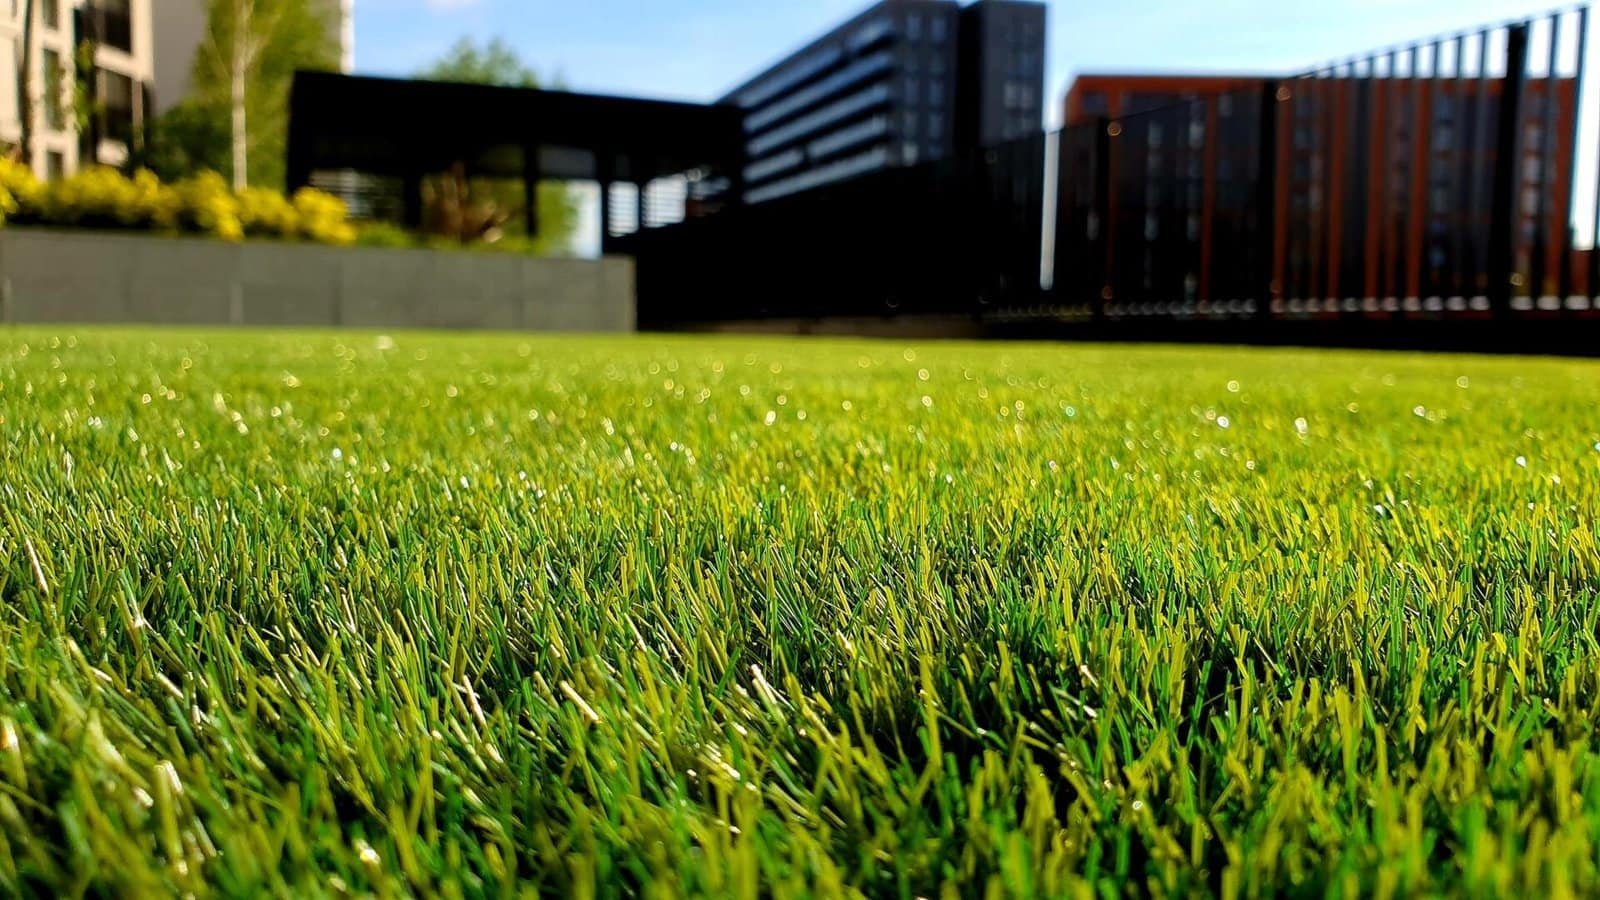 Close-up view of a neatly trimmed backyard artificial turf with modern buildings and a black fence in the background, under a clear blue sky. The fresh greenery and sharp architectural lines create a contrast in textures and colors.